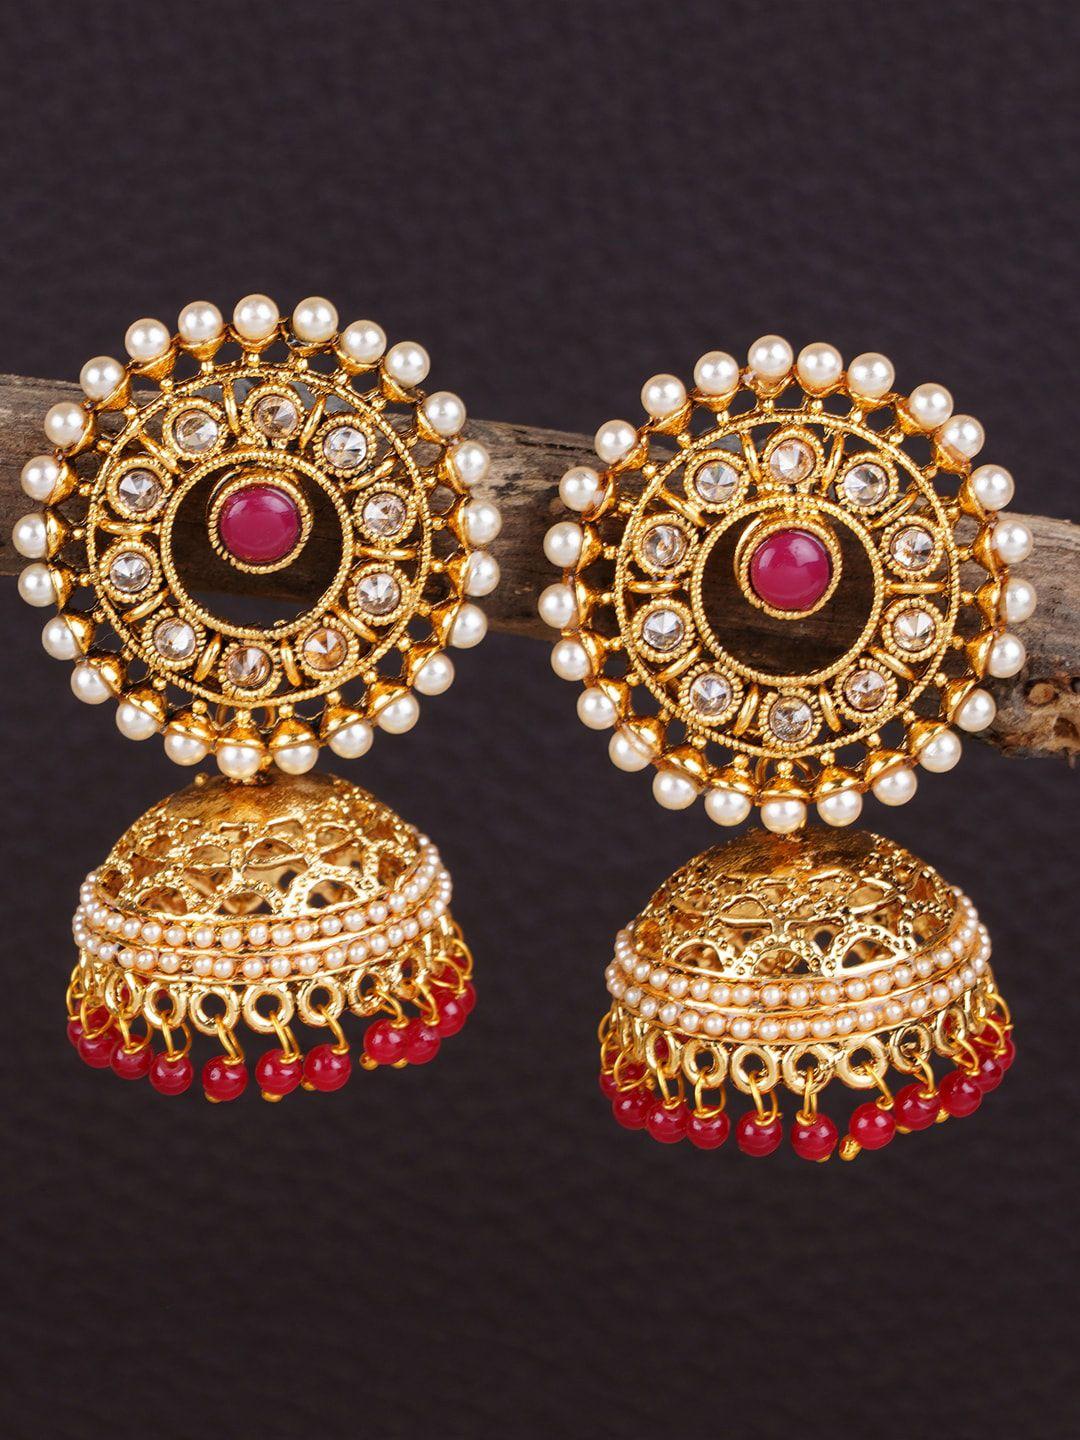 shining diva gold-toned & red dome shaped jhumkas earrings